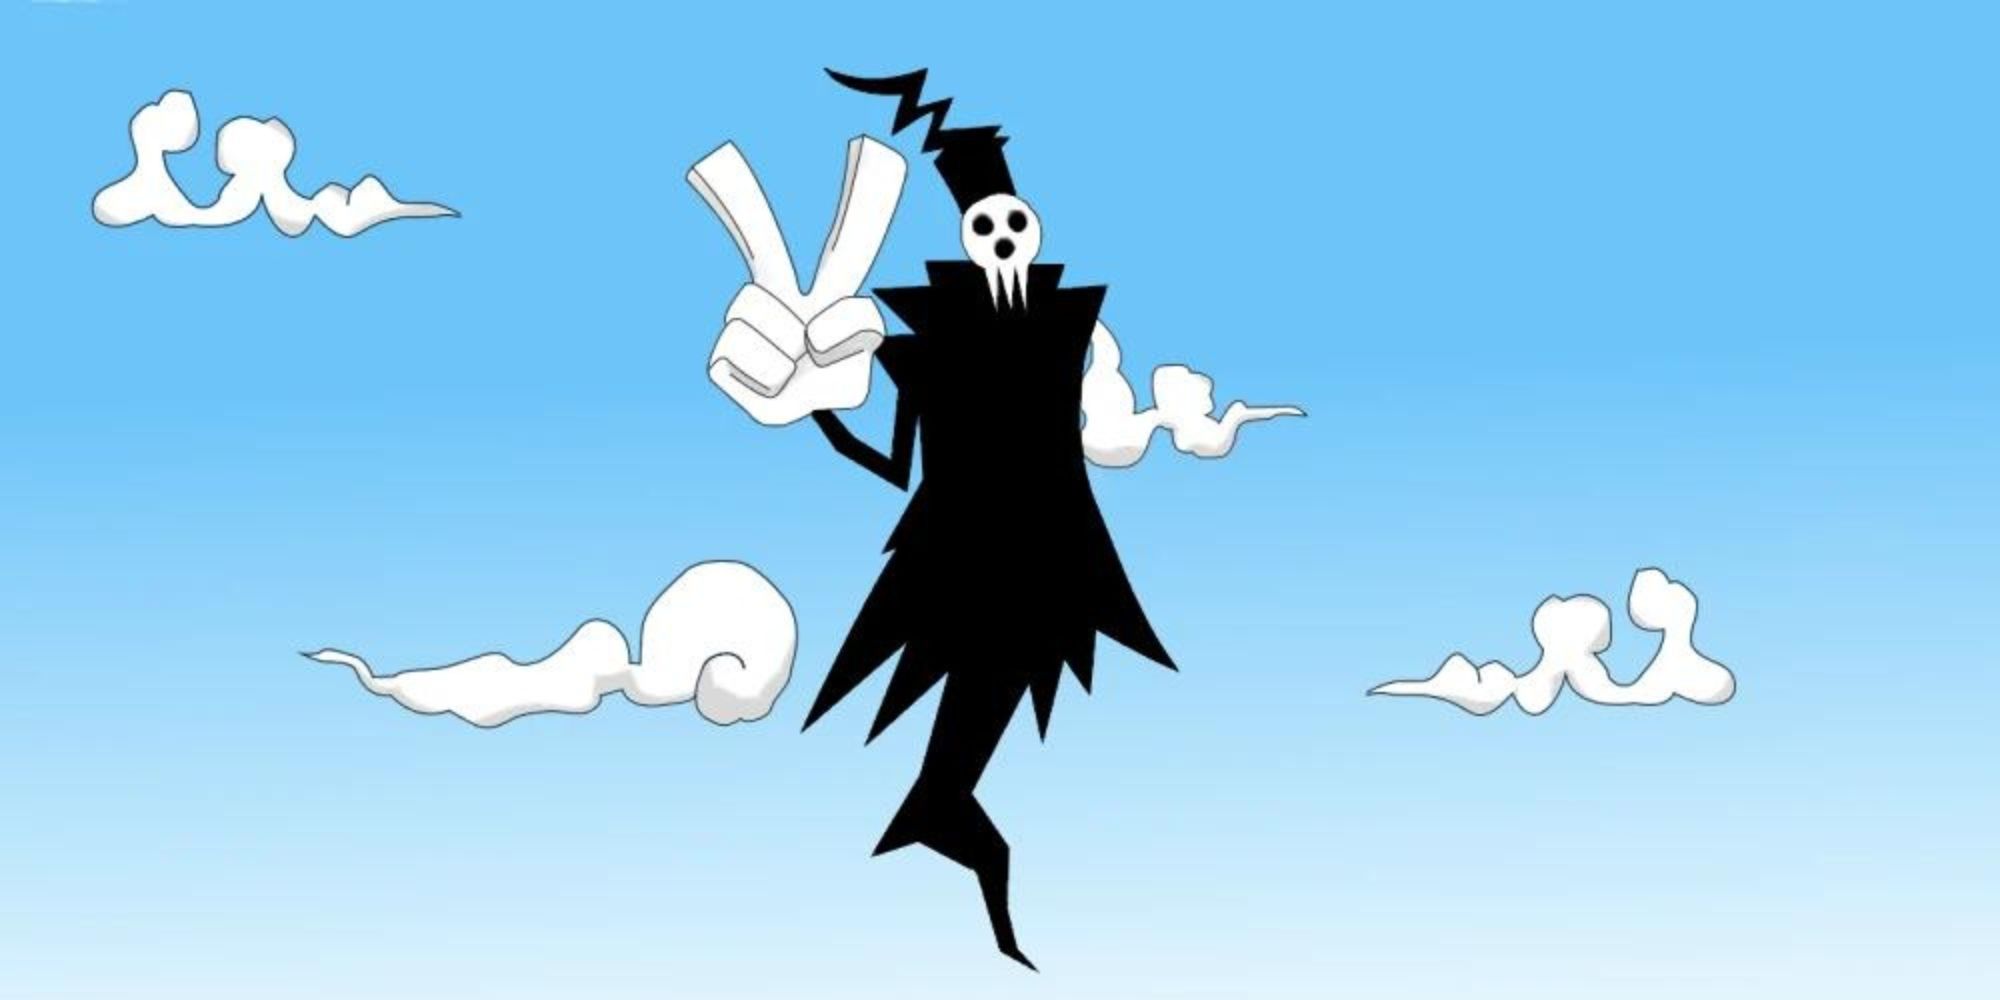 Lord Death in Soul Eater